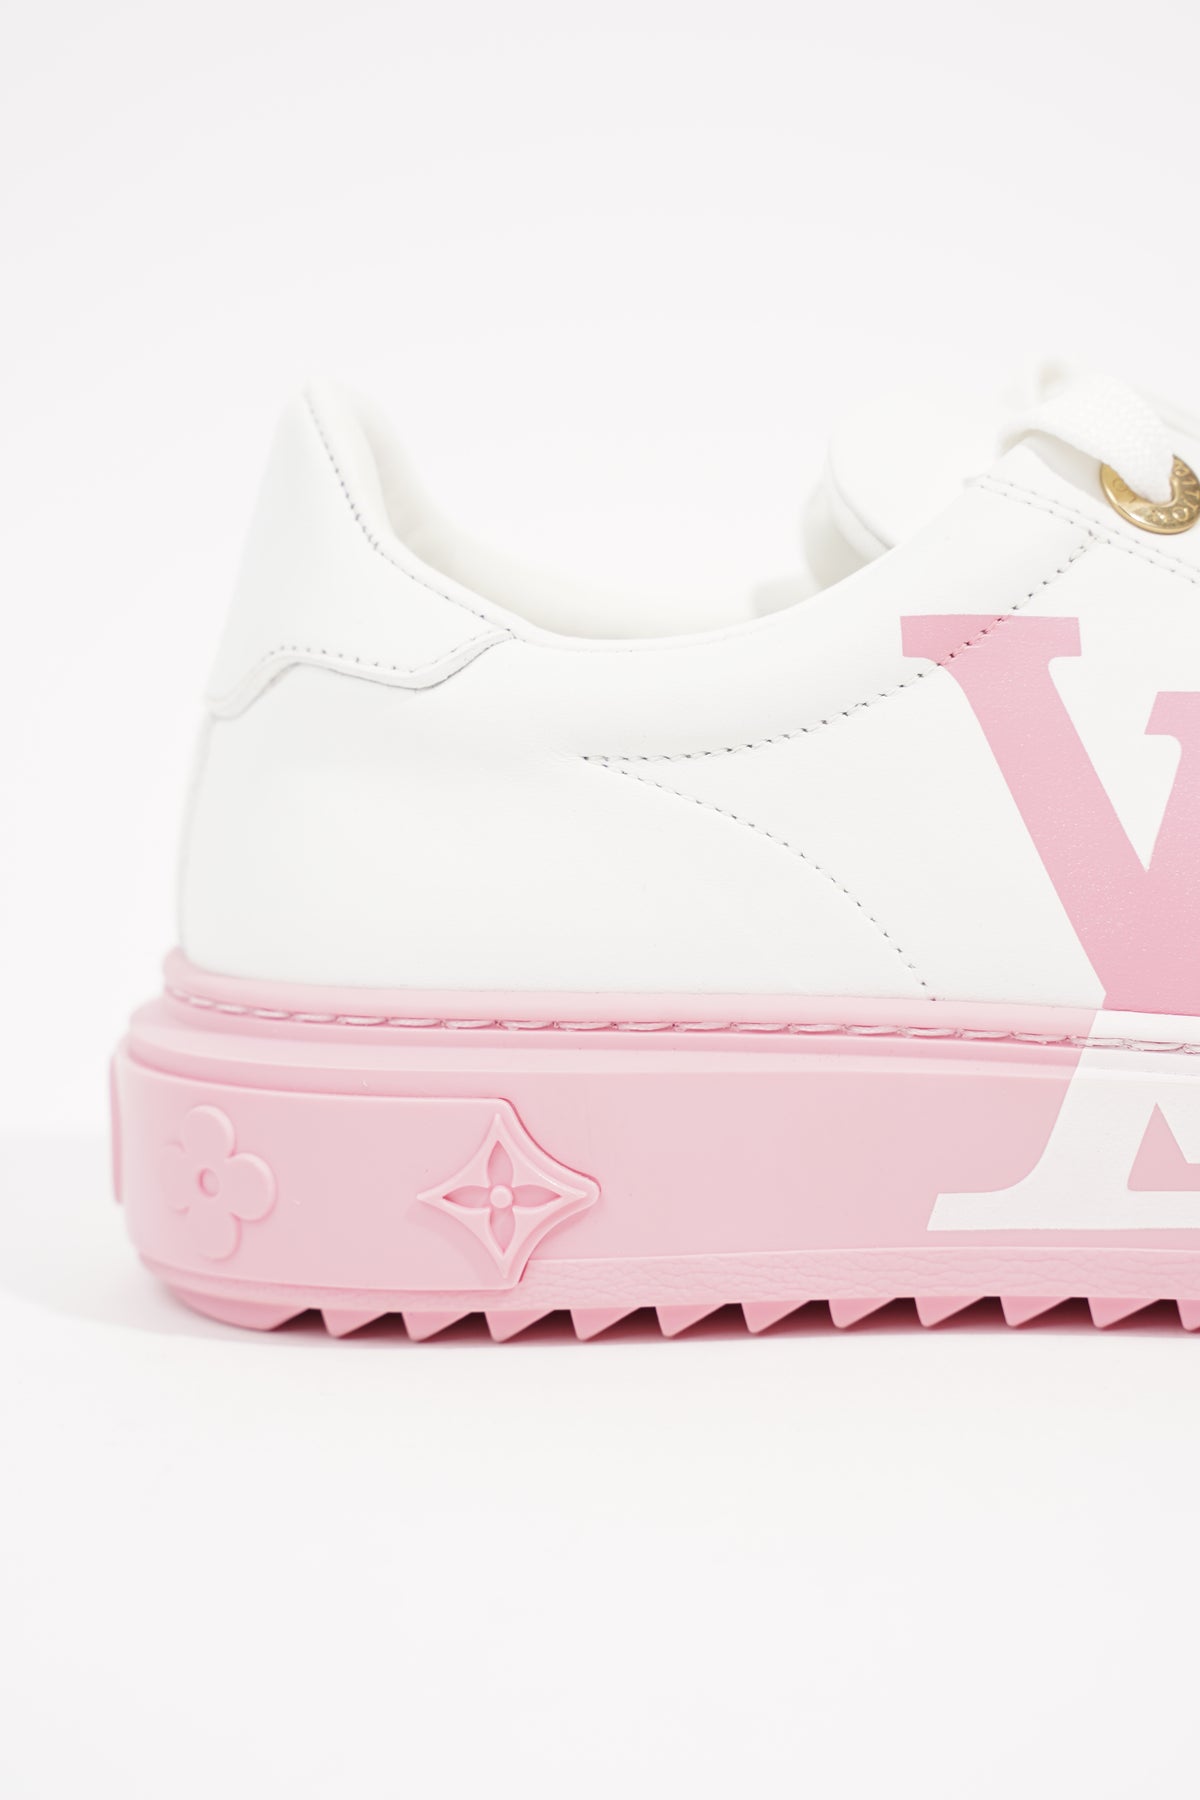 replica LV time out sneaker  Lv sneakers, Sneakers, Trainer heels